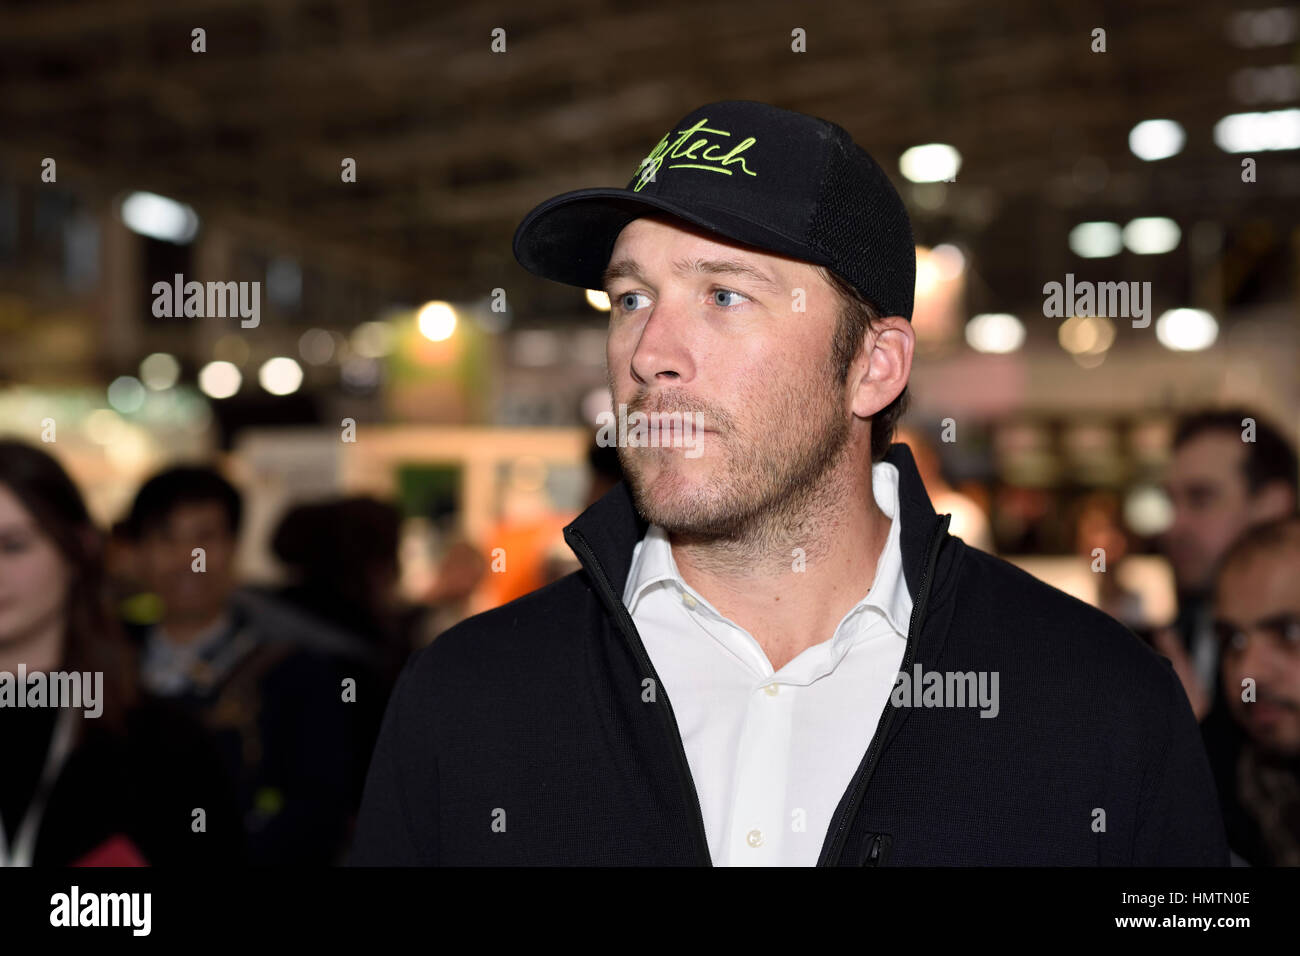 Munich, Germany. 5th Februrary, 2017. Bode Miller, famous American alpine ski racer and Olympic gold medalist, walking the ISPO winter sports tradefair in Munich Germany on the opening day. Stock Photo